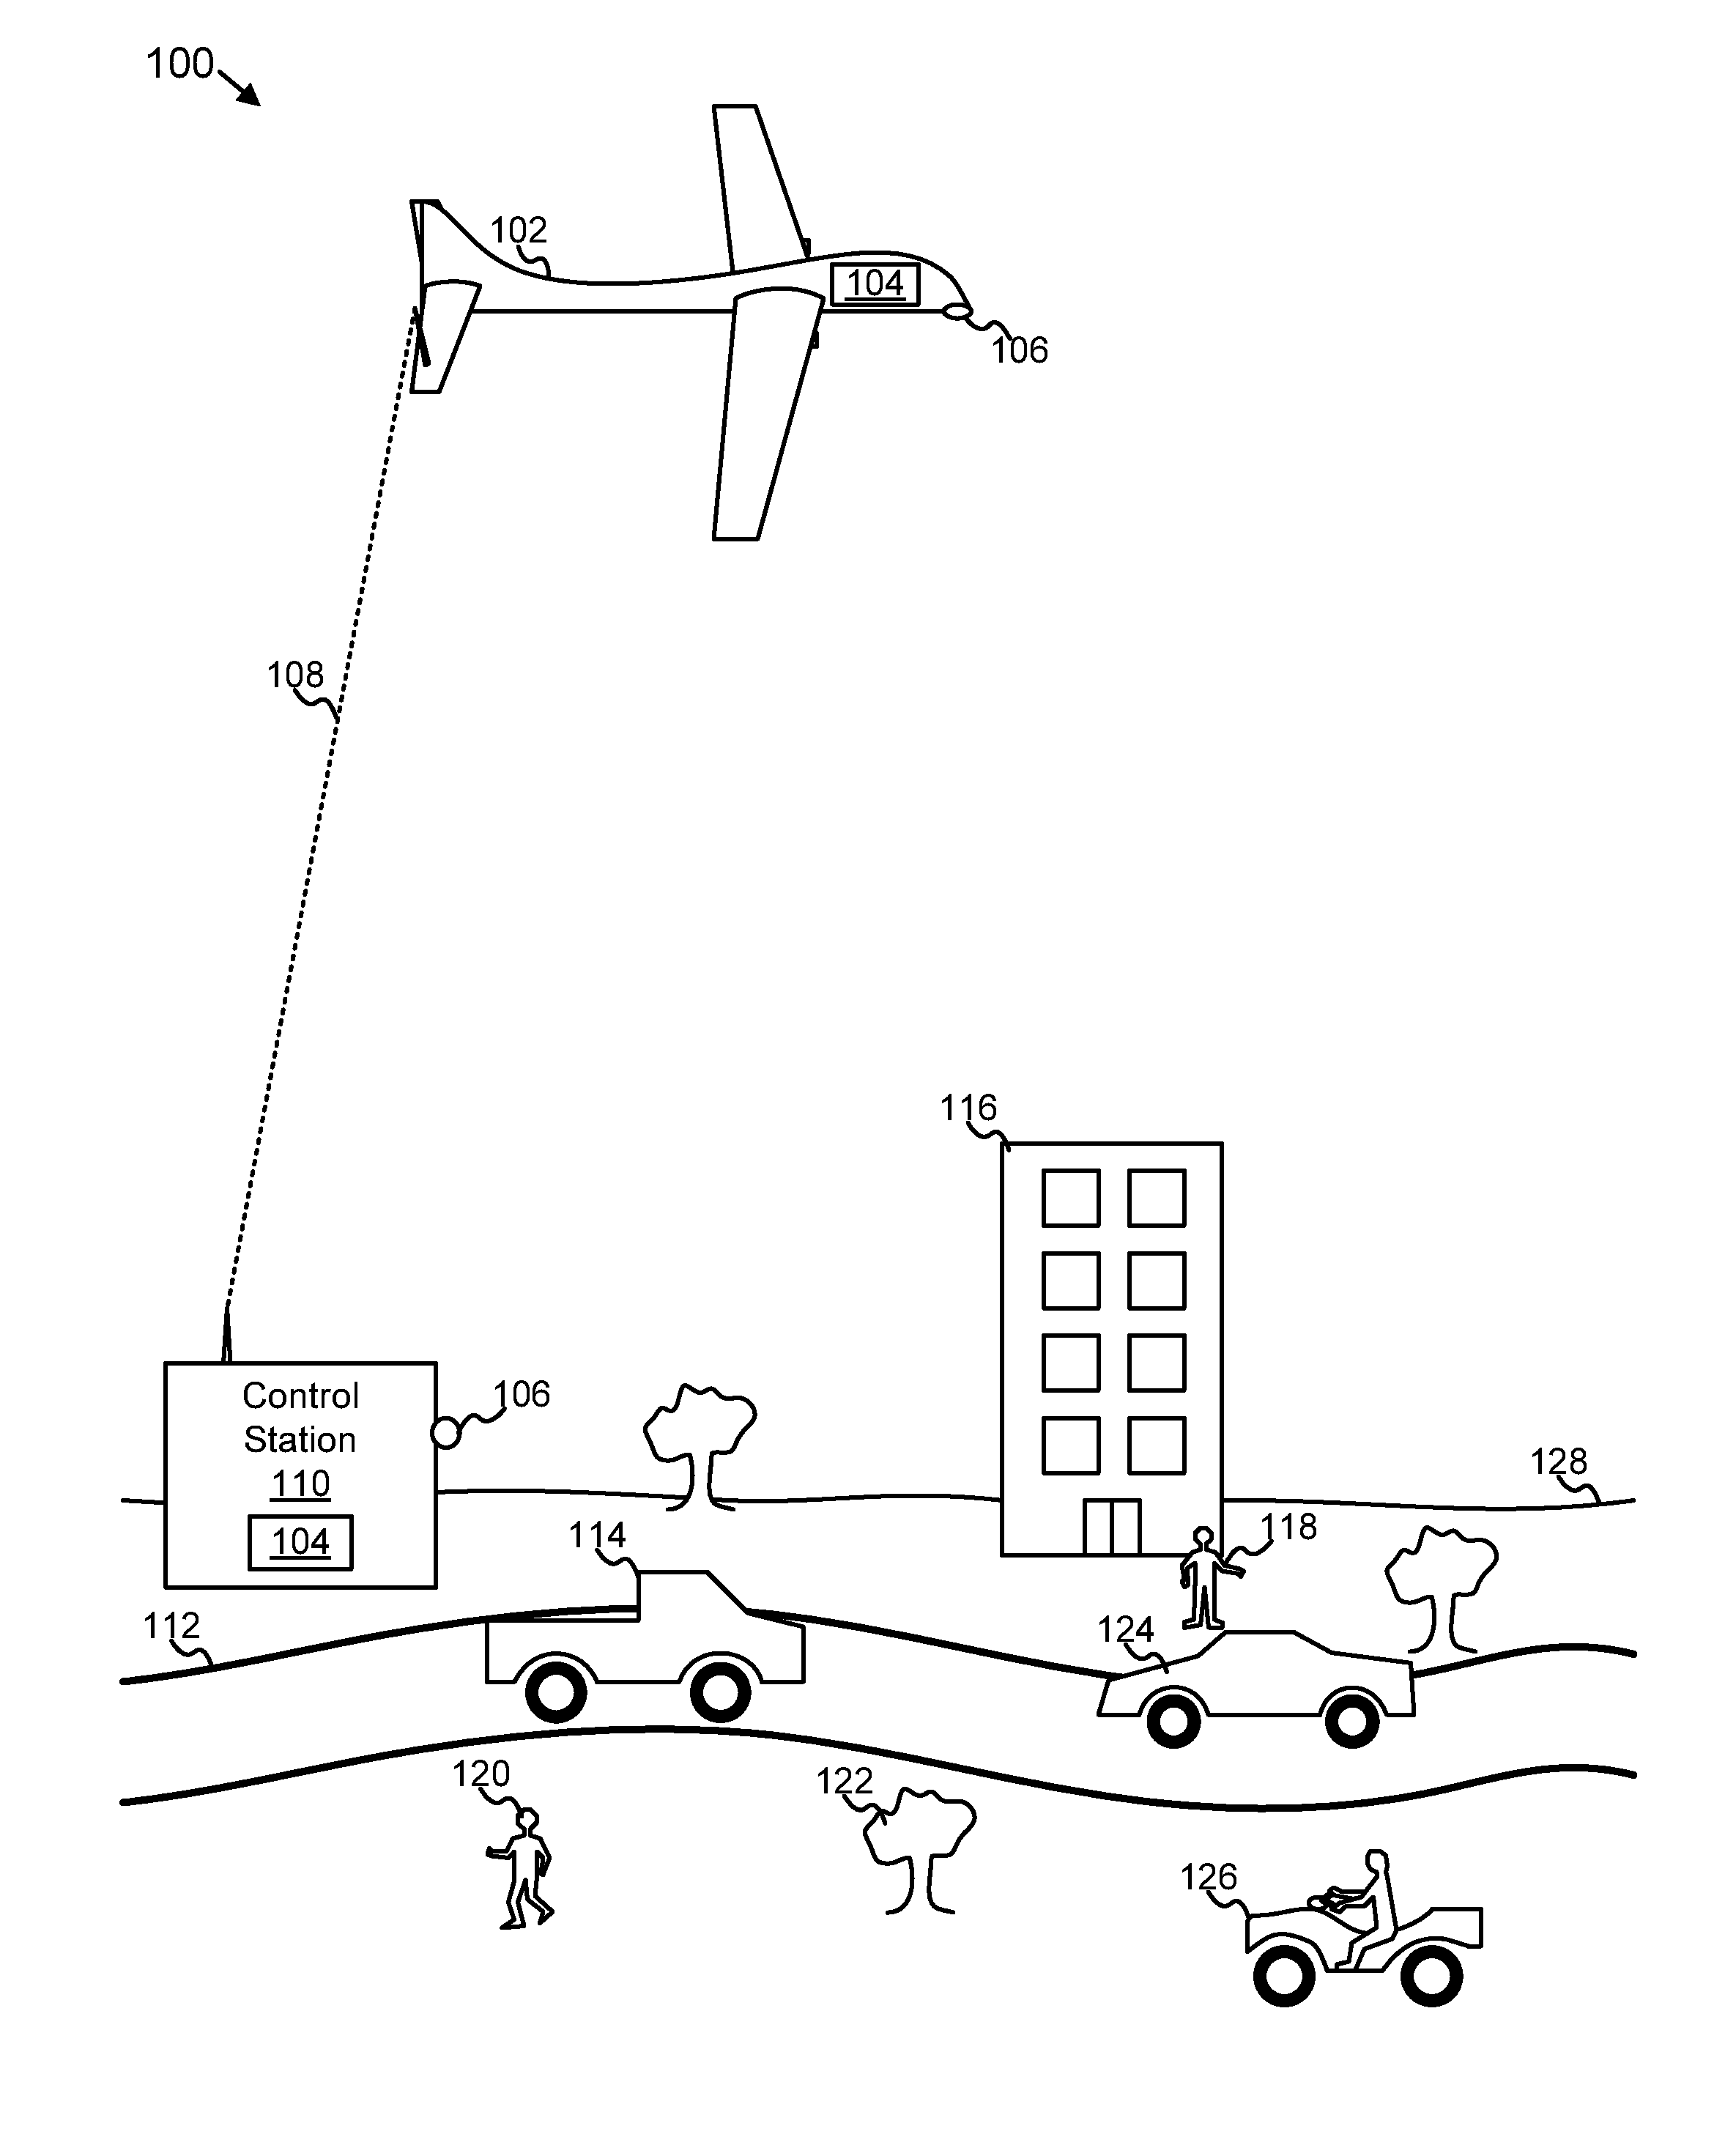 Apparatus, system, and method for object detection and identification